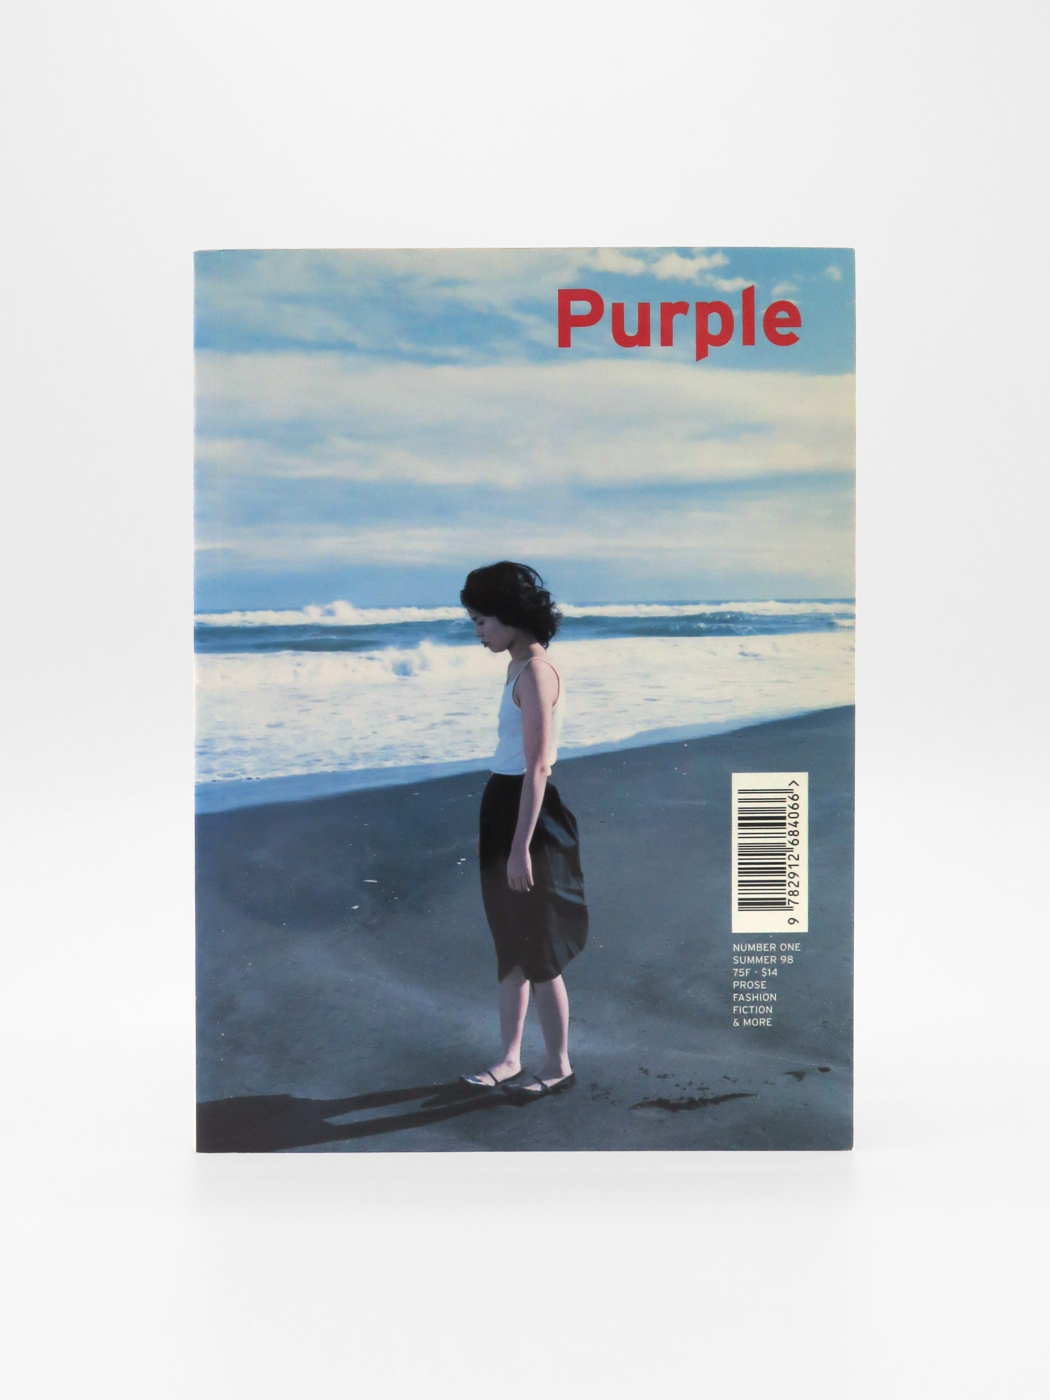 Purple, Number One Summer 1998